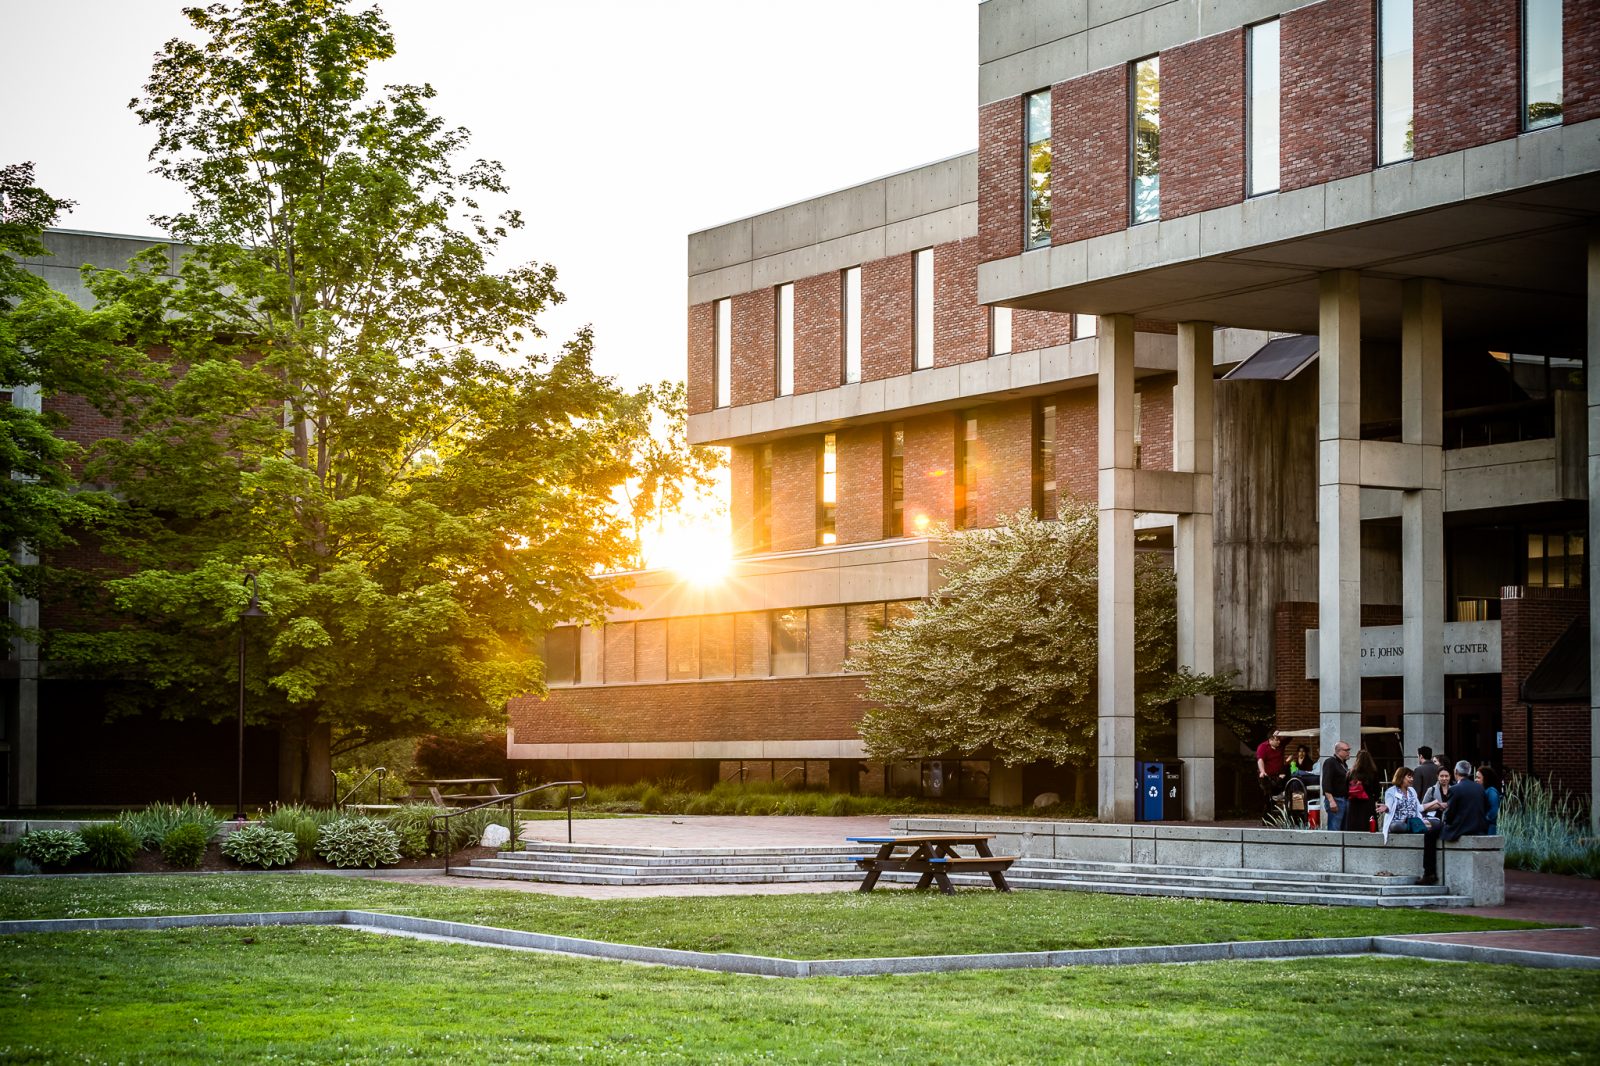 A front view of the library with the sun setting in the background